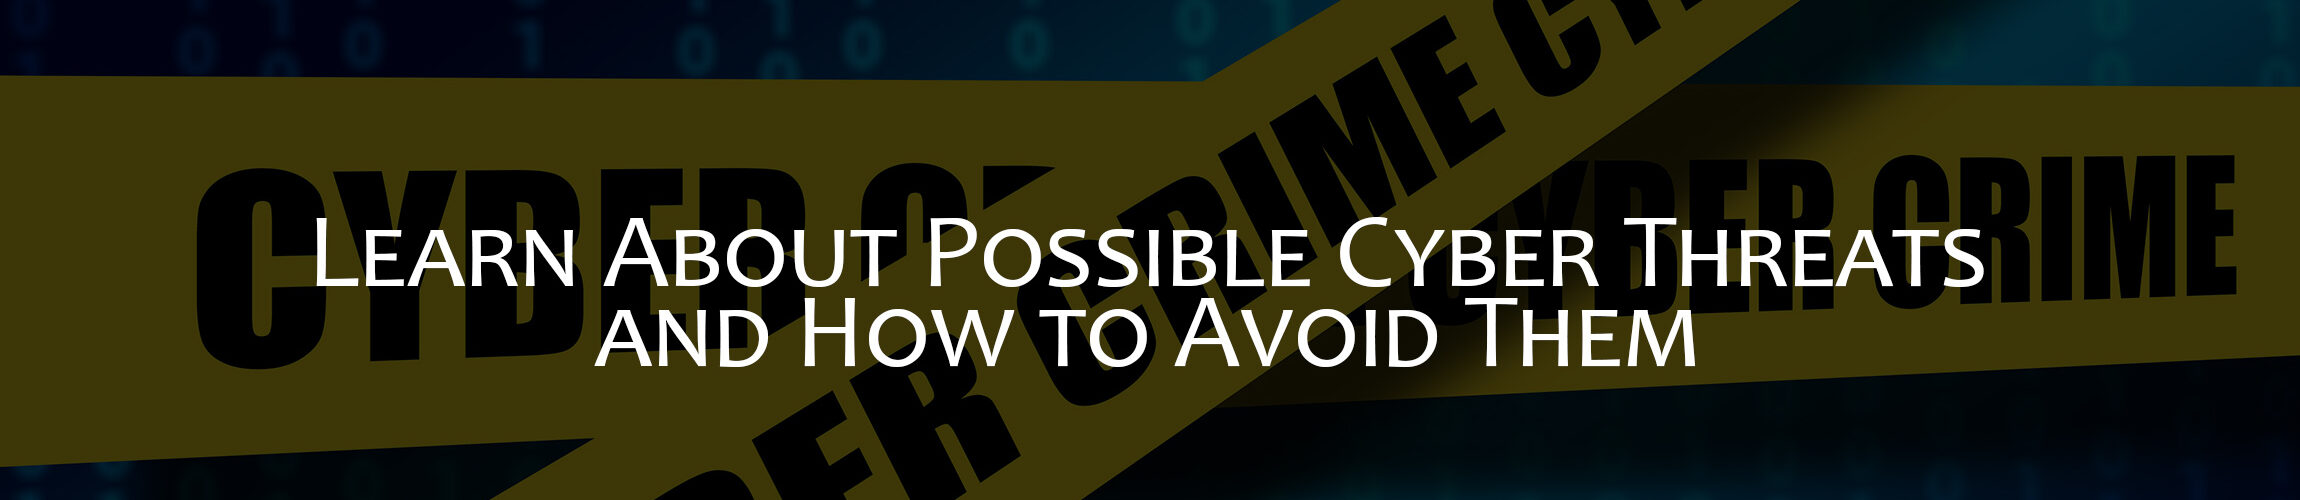 Learn About Possible Cyber Threats and How to Avoid Them